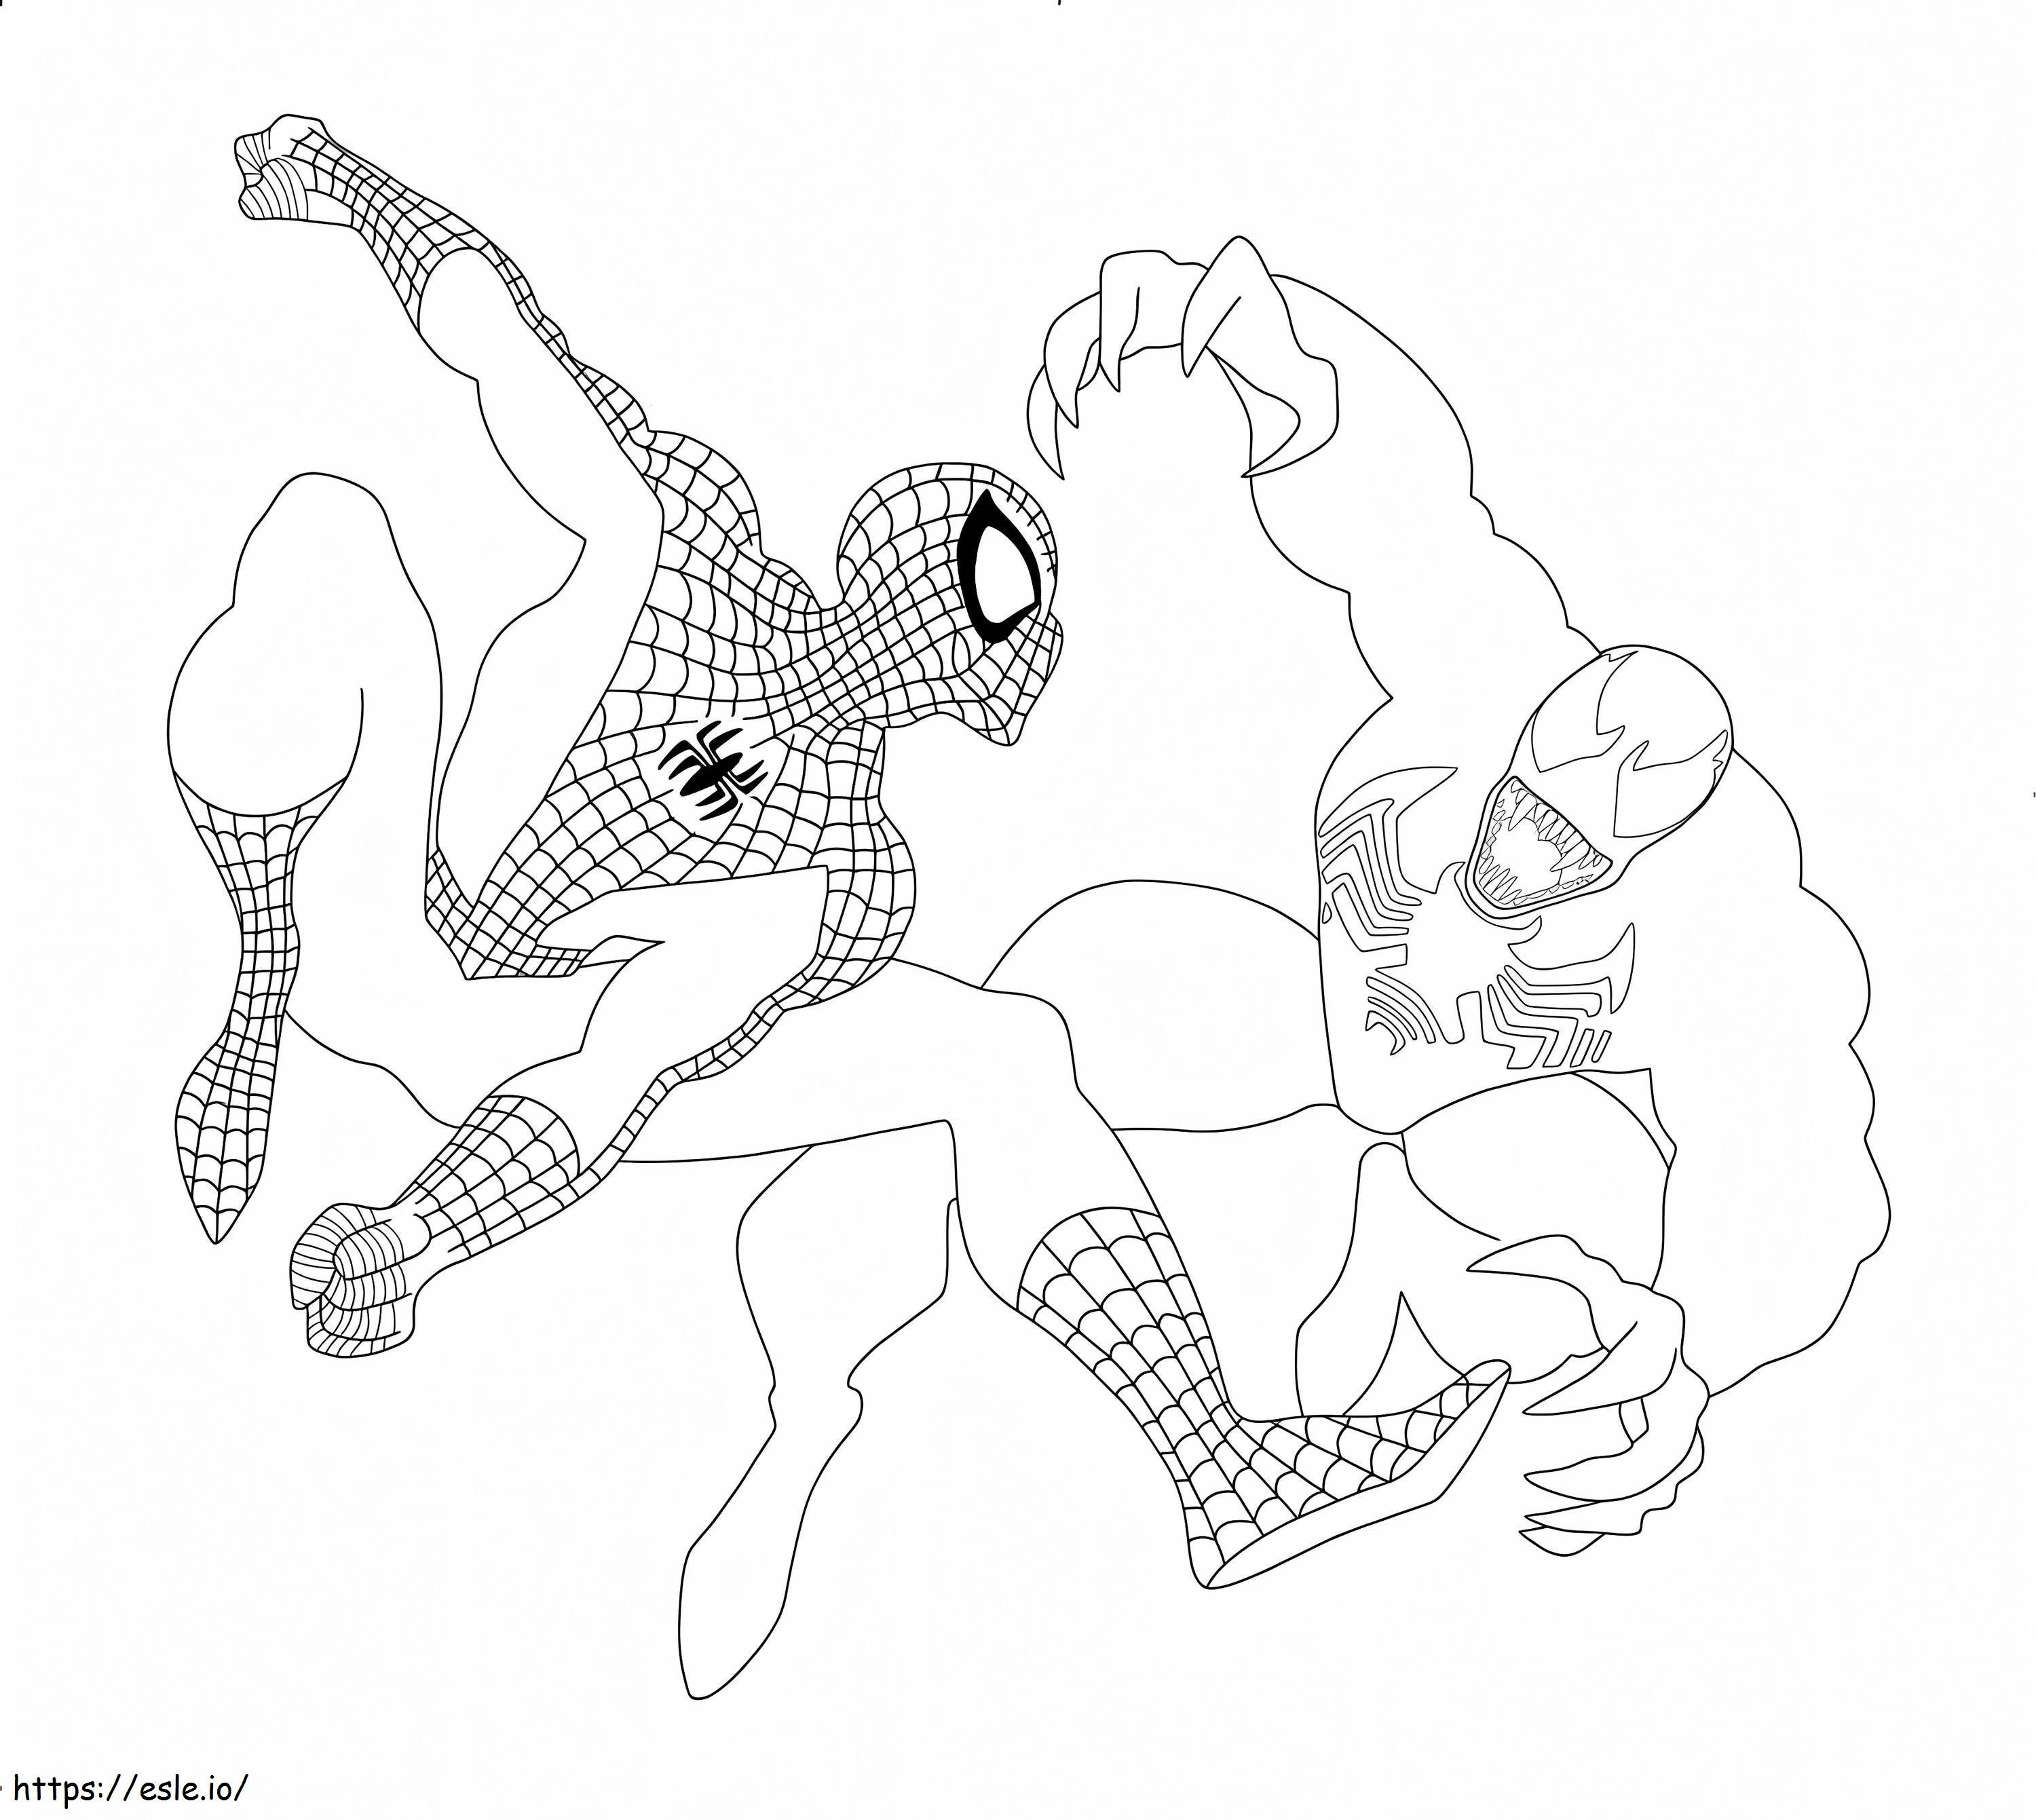 Spiderman Punching Venom coloring page